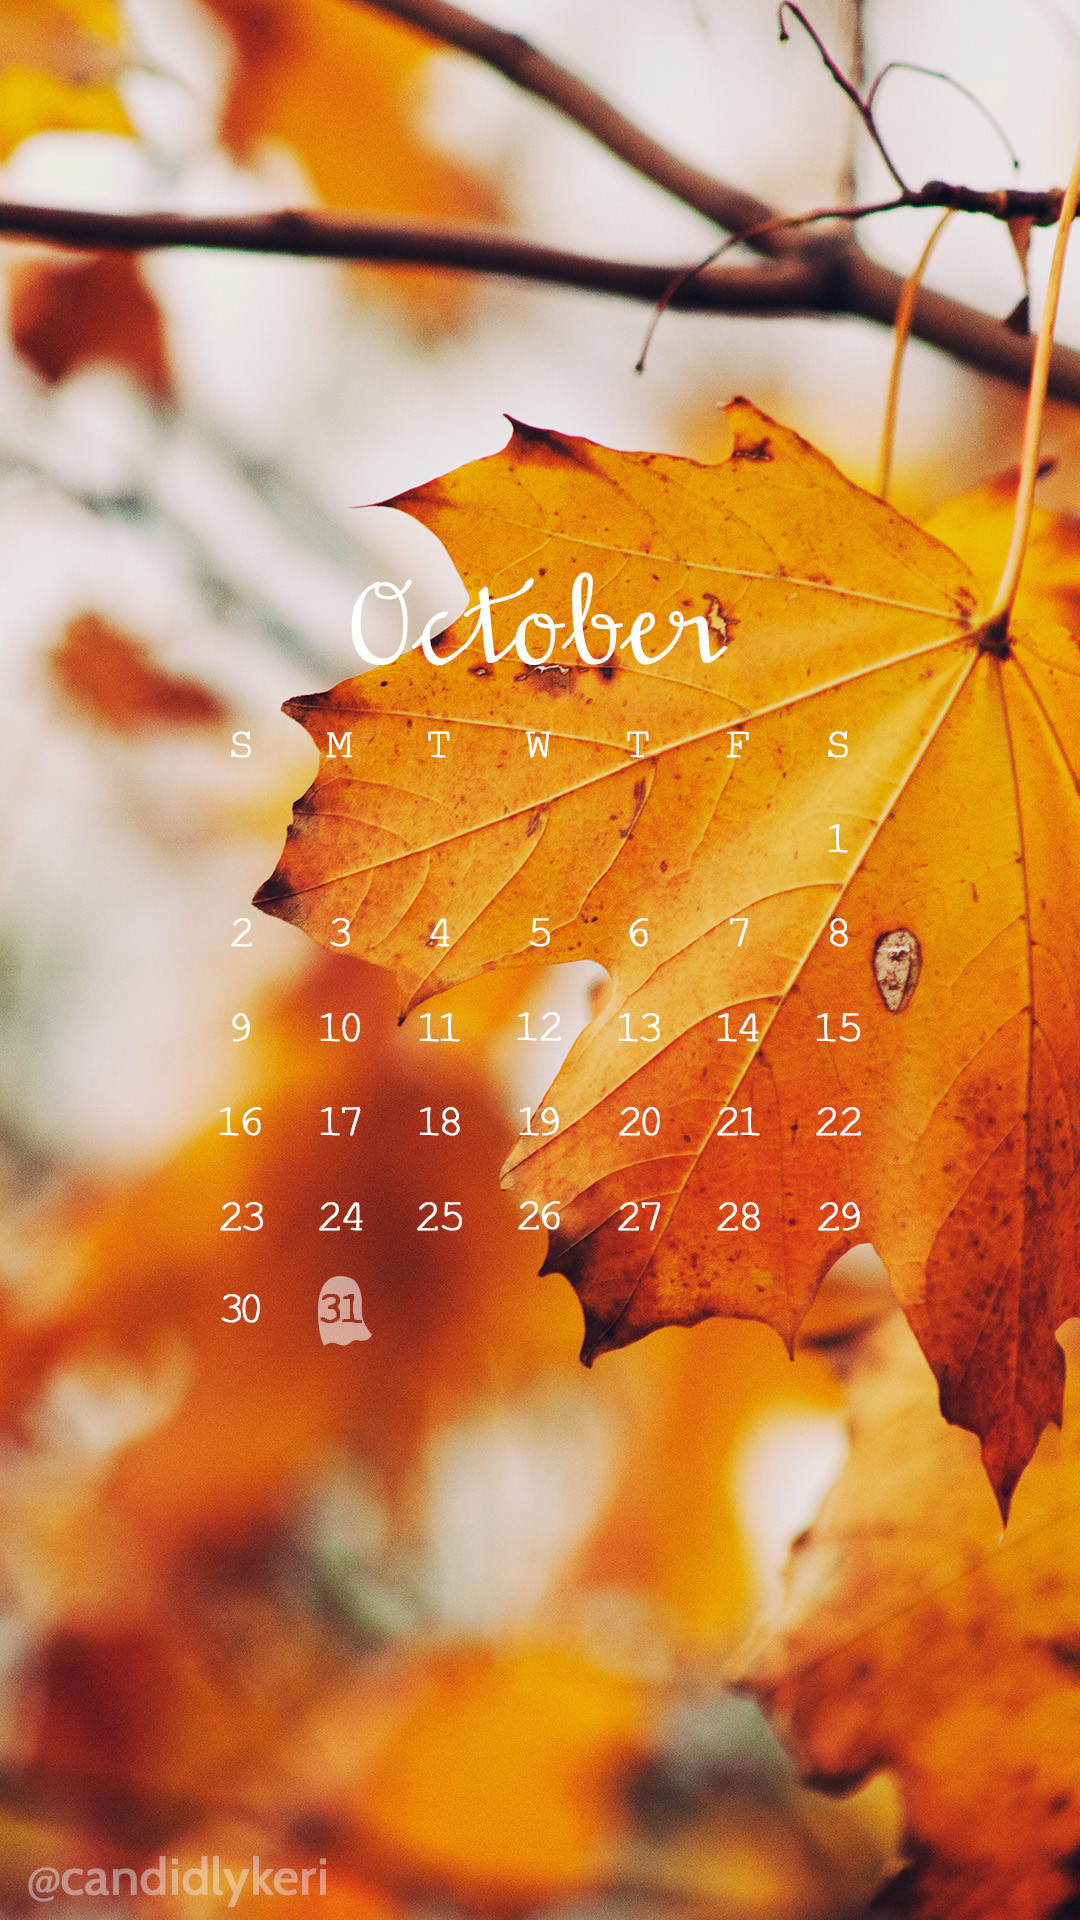 1080x1920 Fall leaves photo October calendar 2016 wallpaper you can download for free  on the blog!